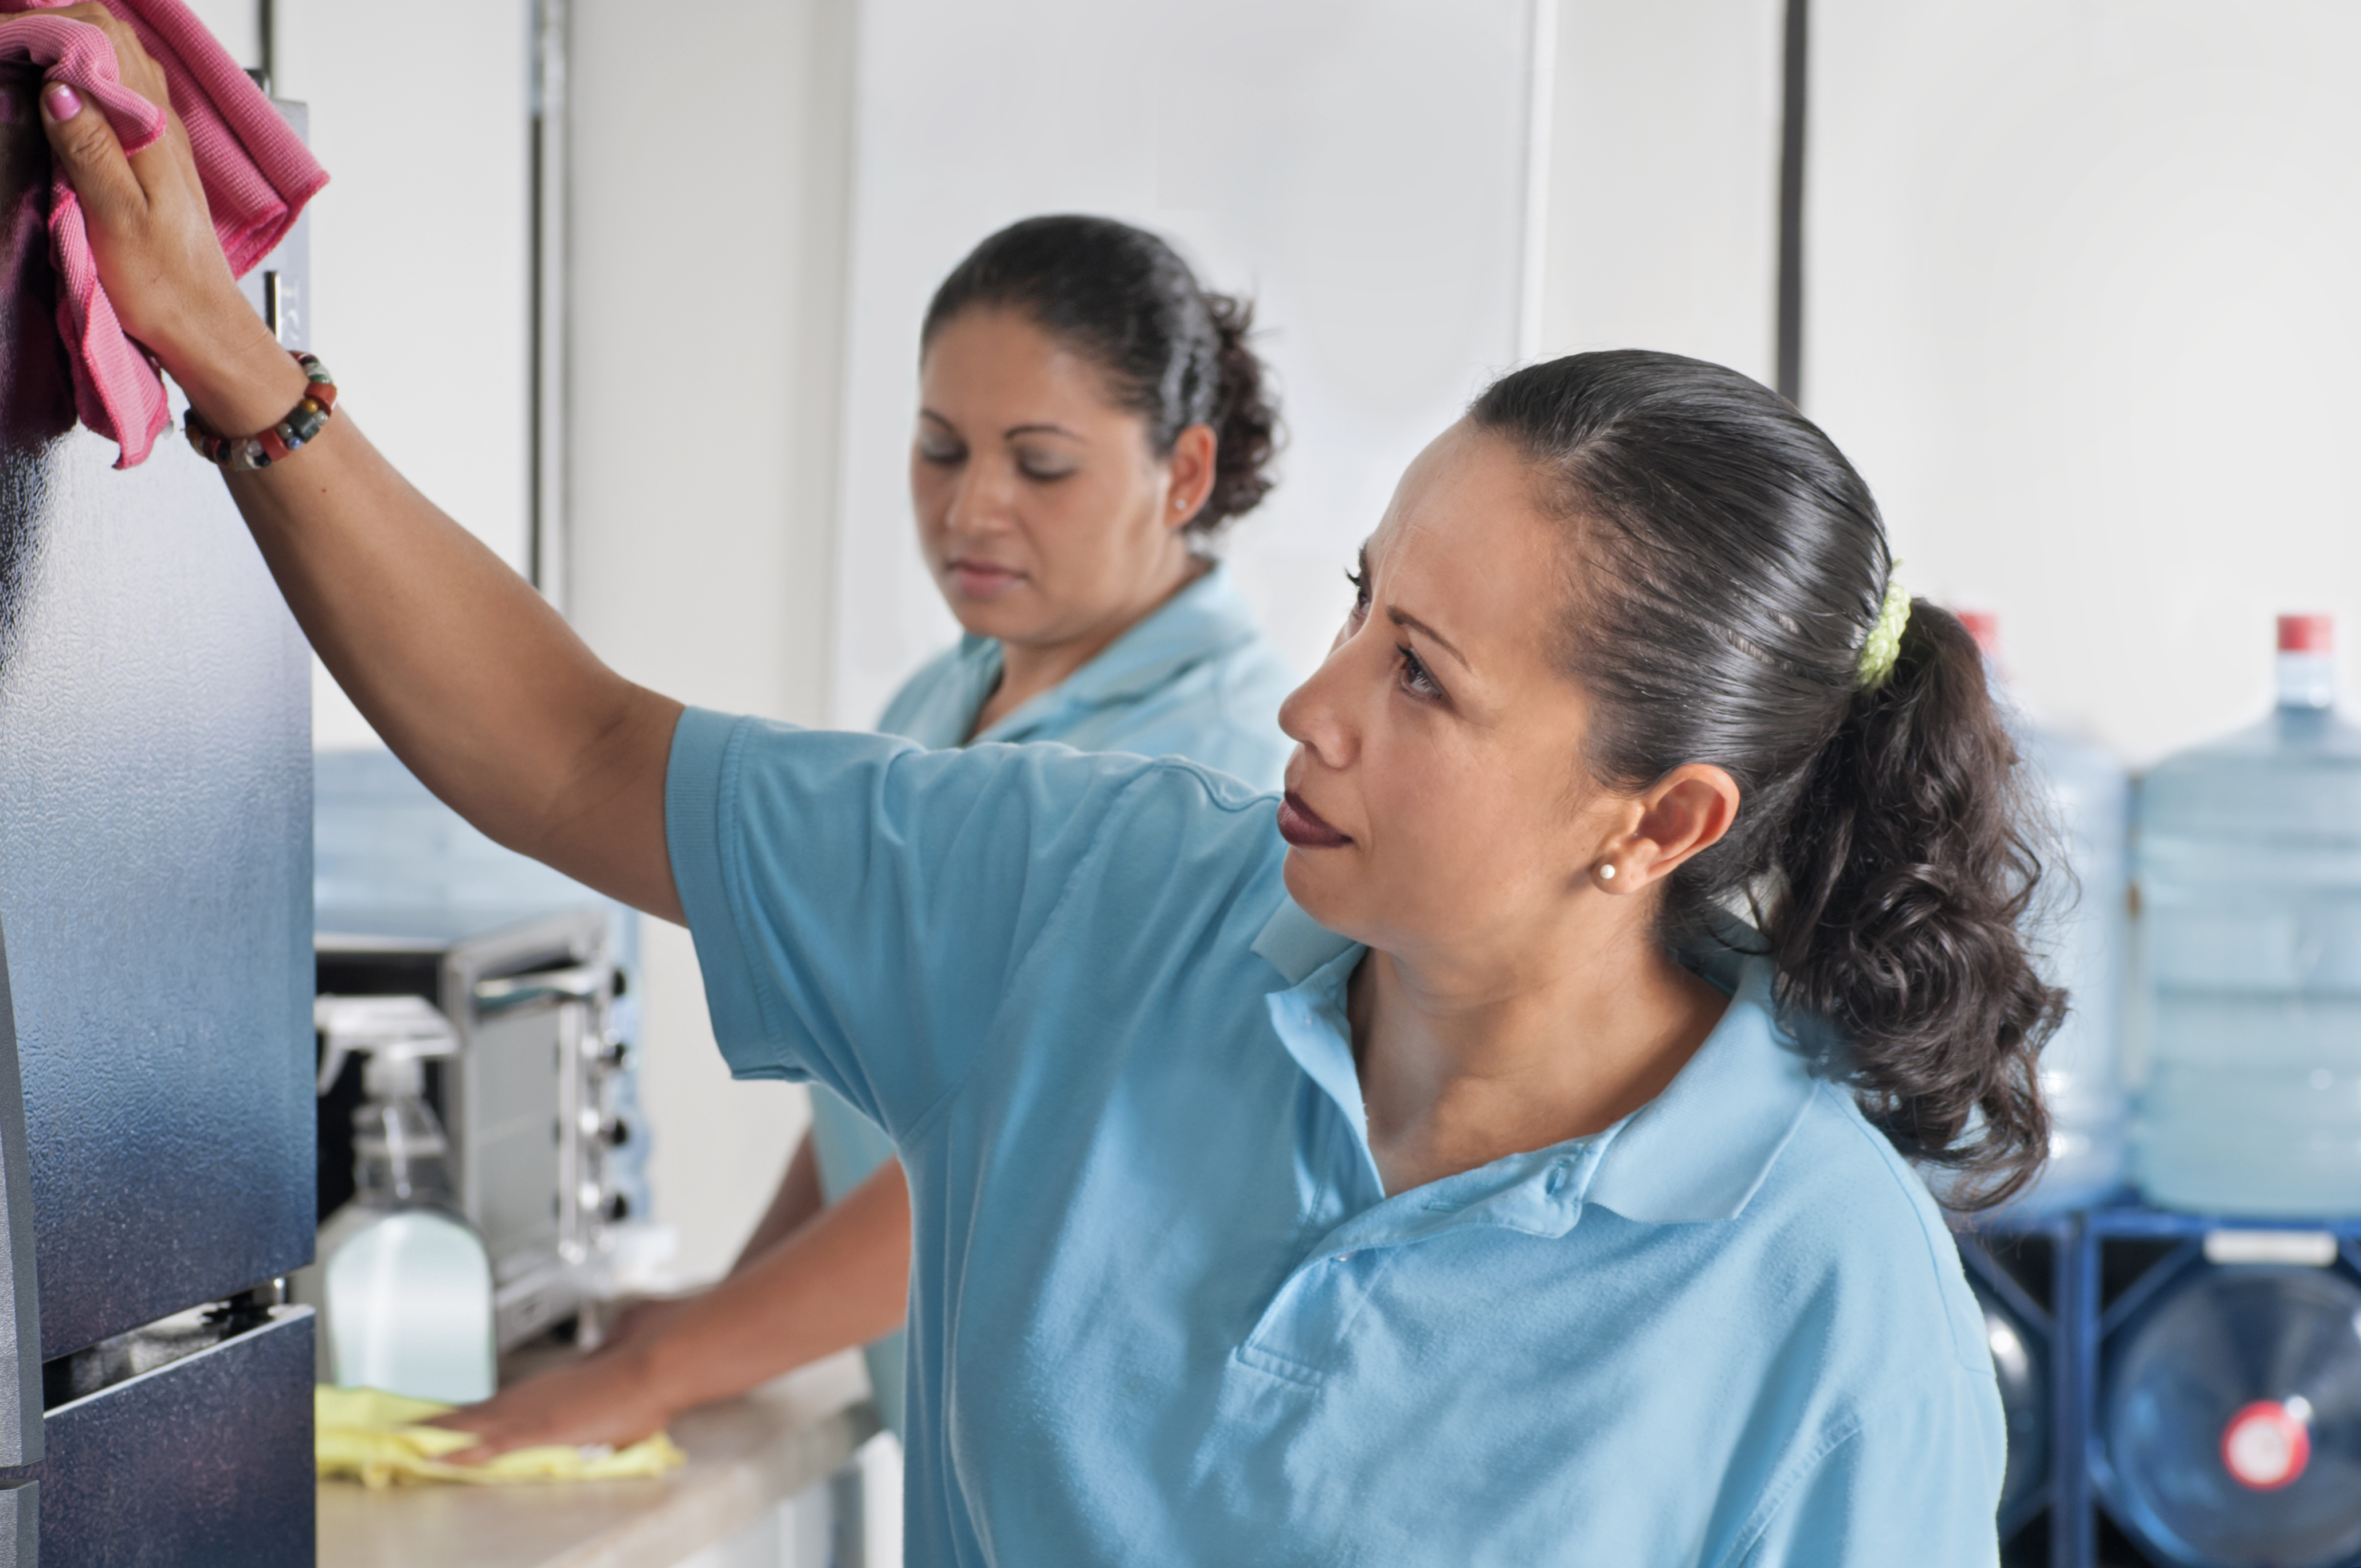 Two Latina women use microfiber cloths to clean the appliances in an office kitchen.